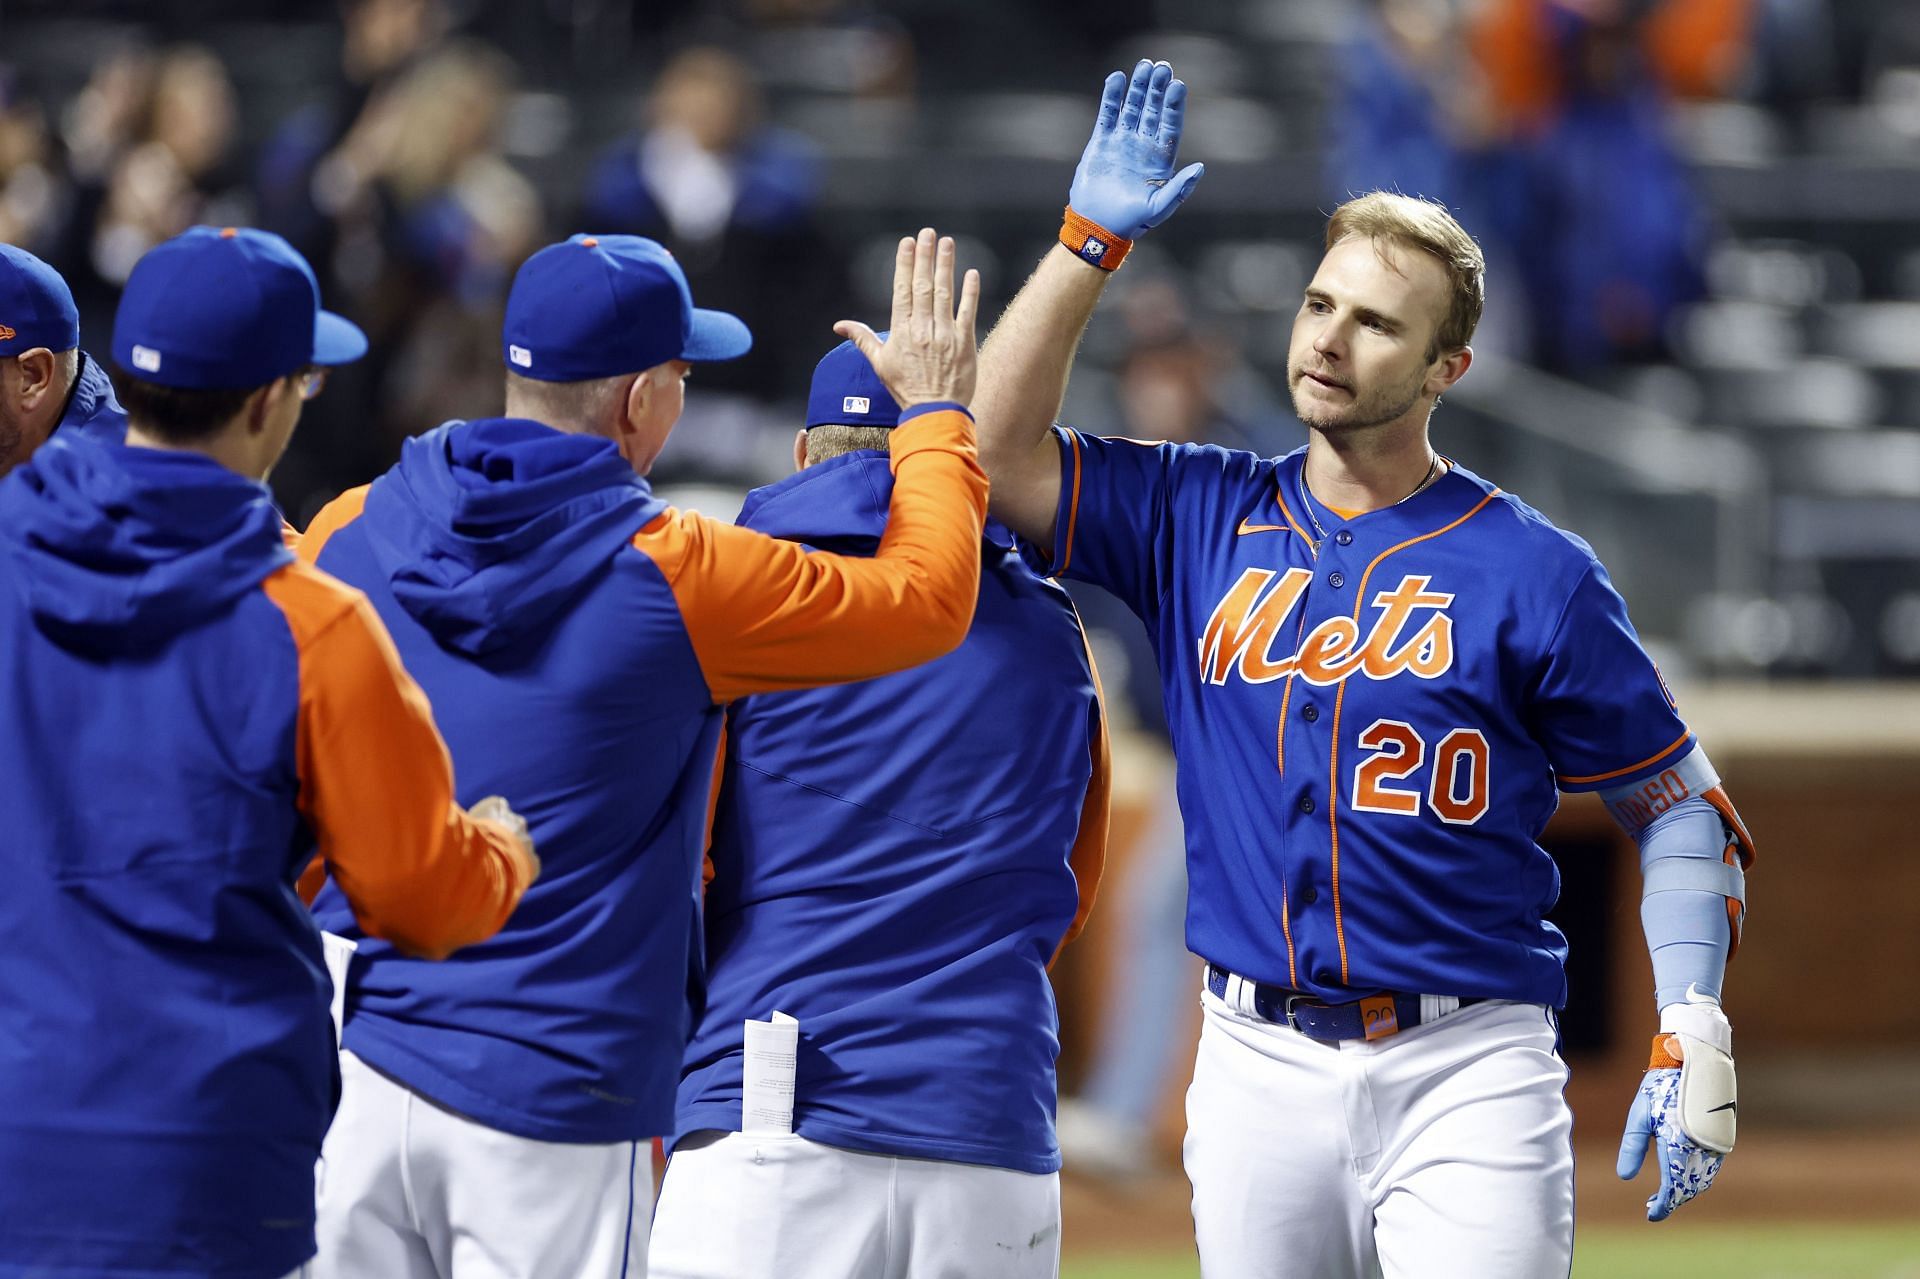 Can Pete Alonso help the Mets turn it around?